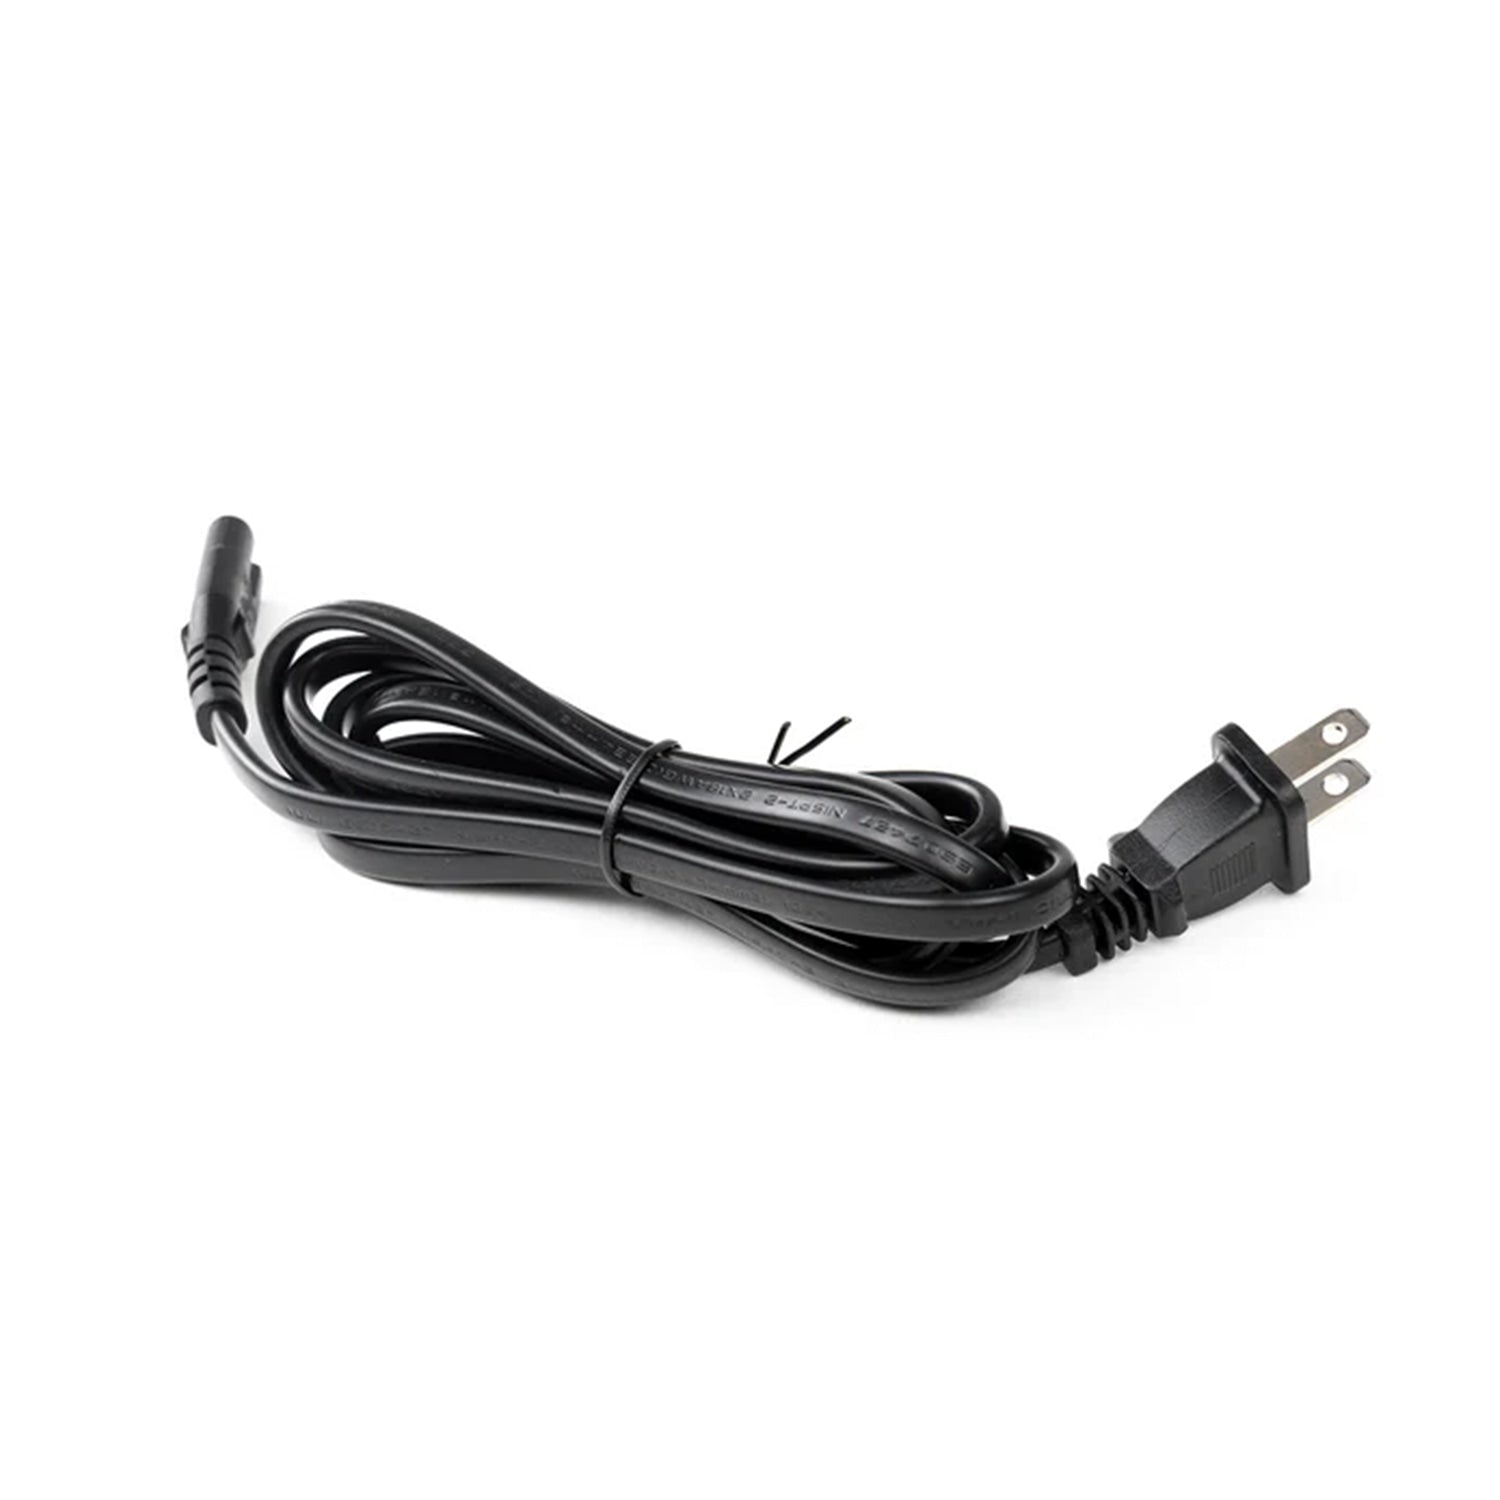 Electric Bike Charger with Aviation Connector - 2A Output - UL Listed